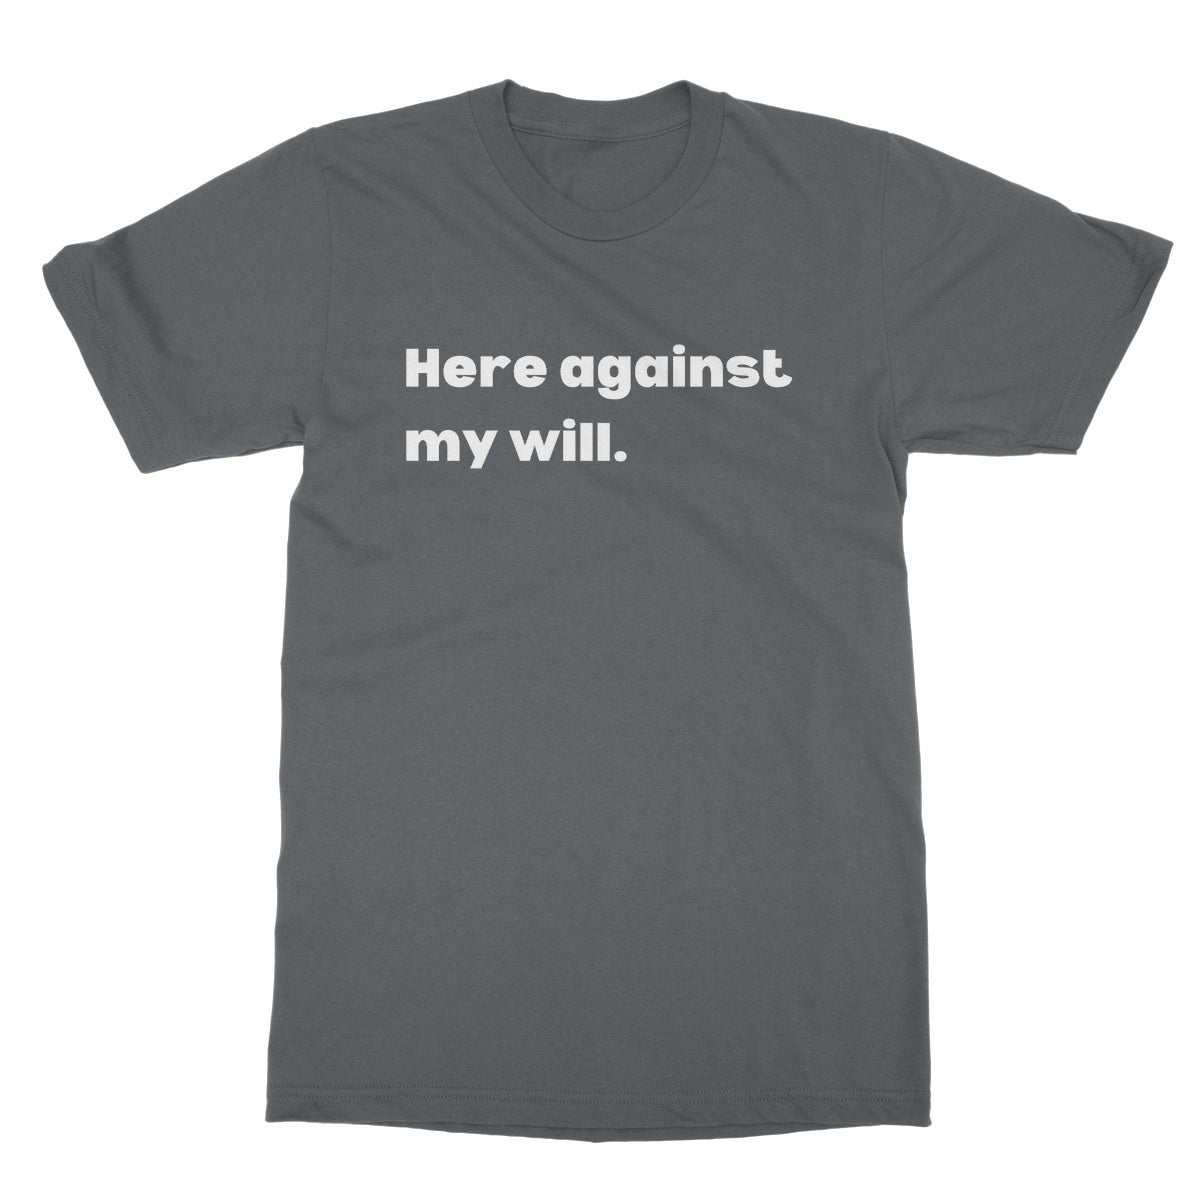 Here against my will T-Shirt